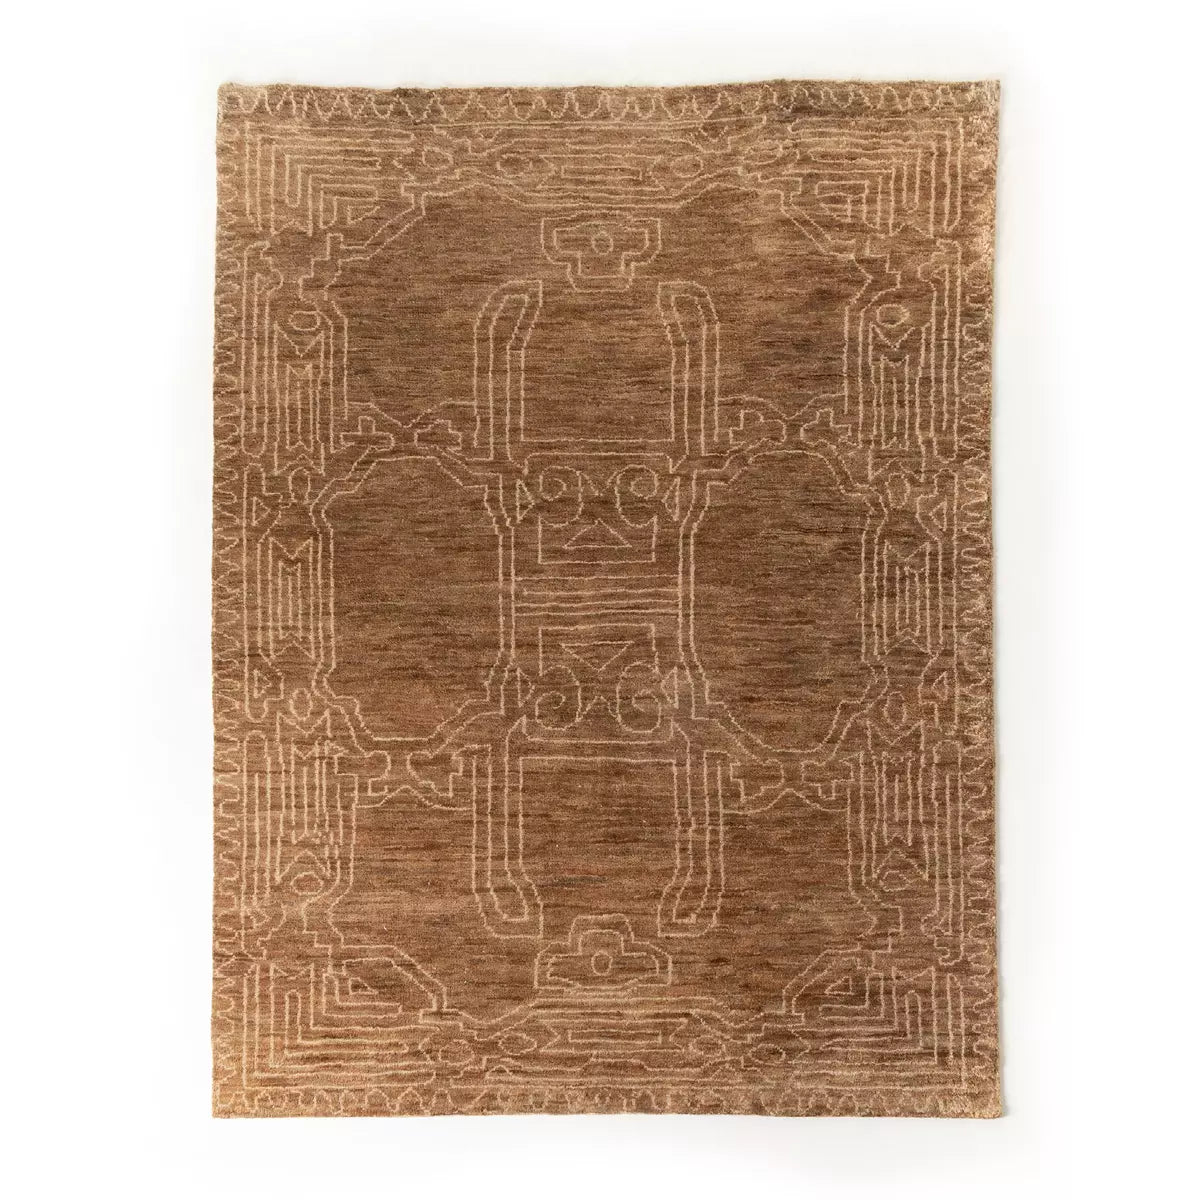 Tozi Hand Knotted Jute Rug 9x12'